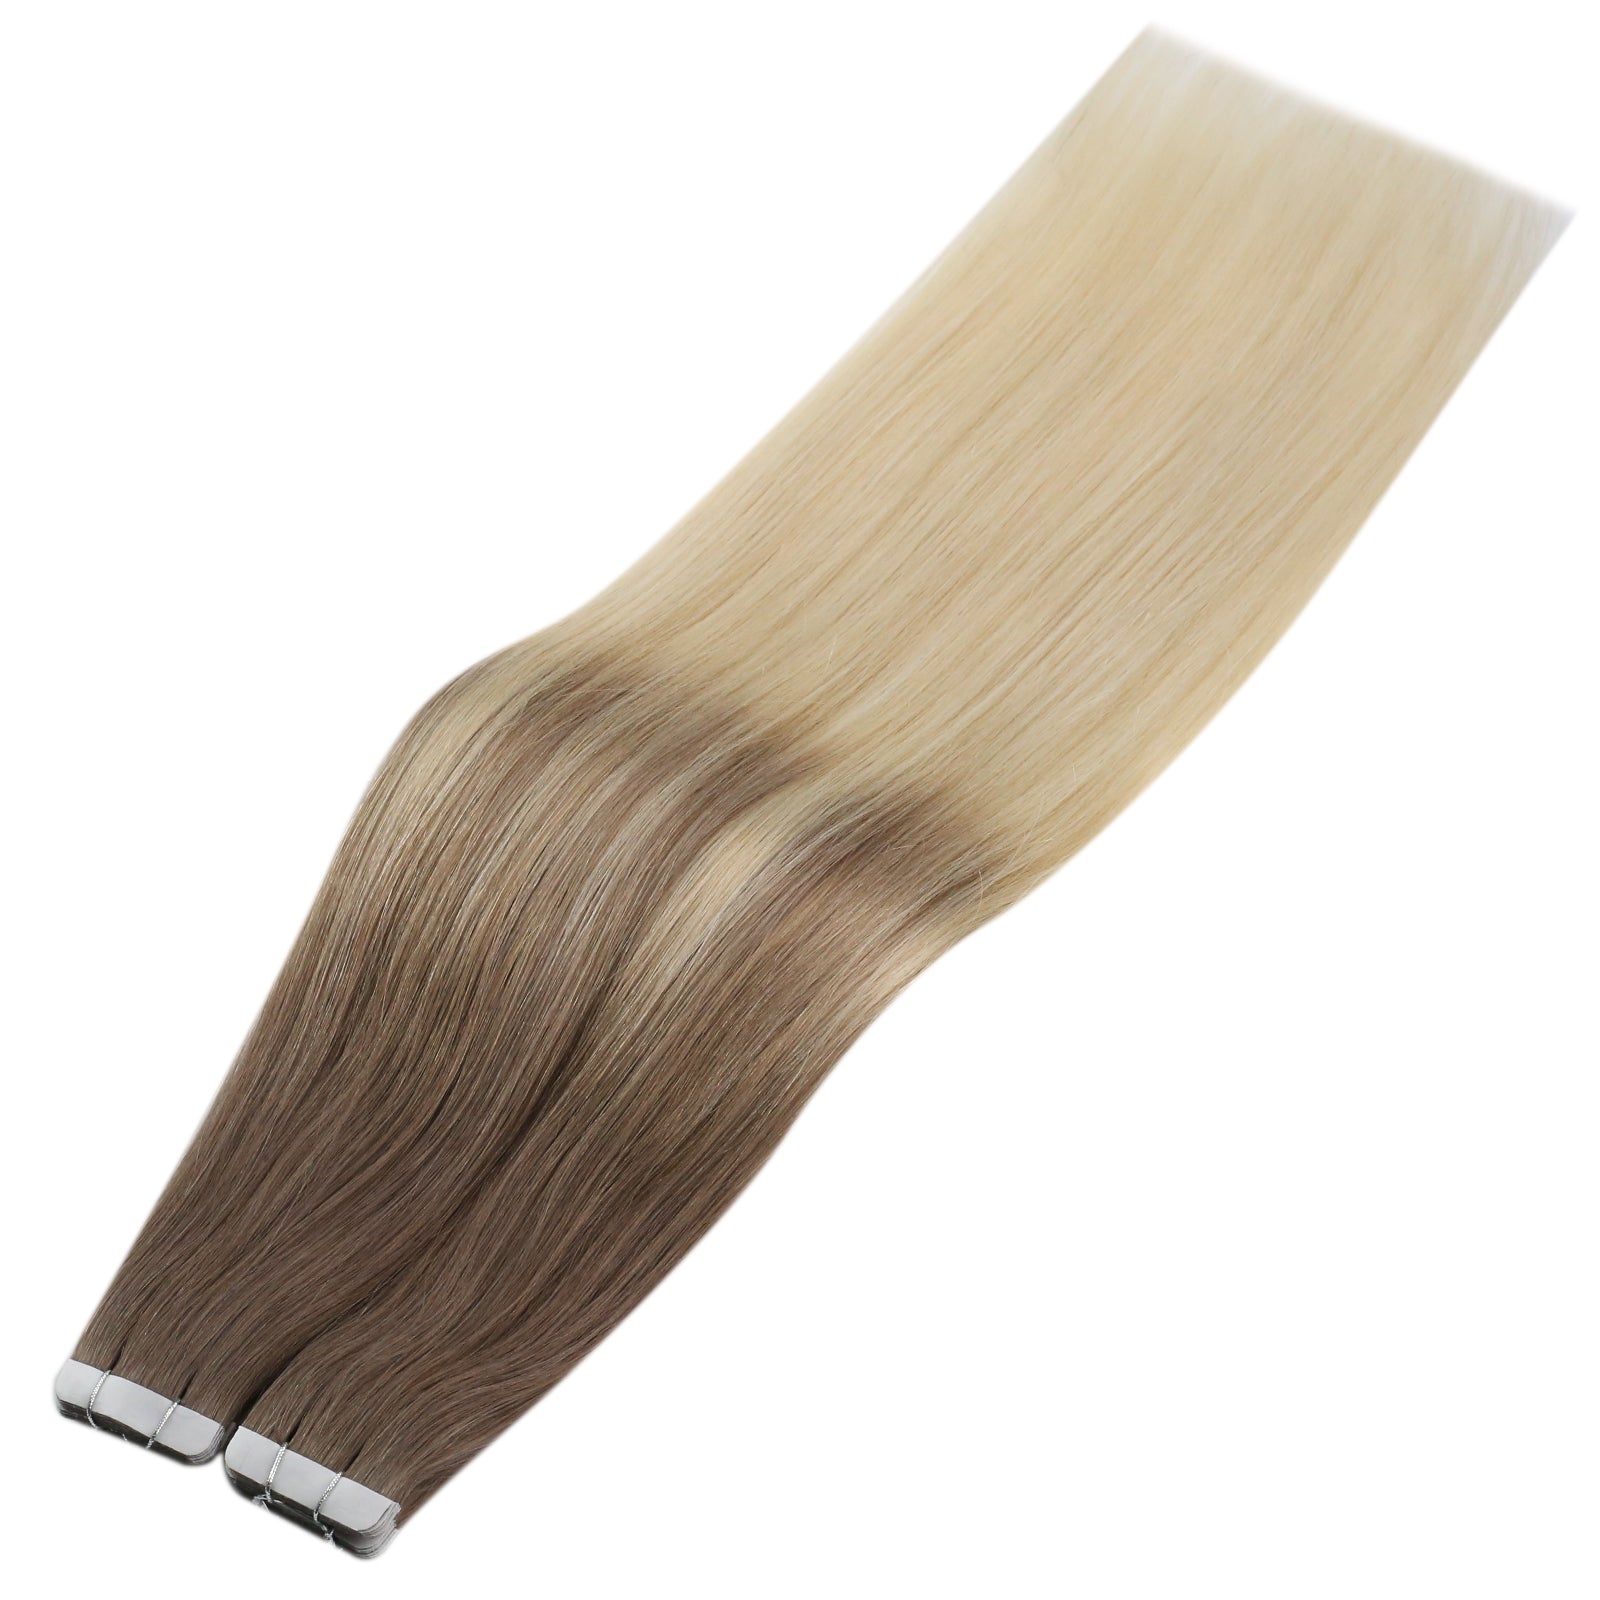 sunny hair tape in extensions hair tape extensions，seamless tape in hair extensions tape hair extensions tape secrets tape in hair extensions hair tape in extensions 22